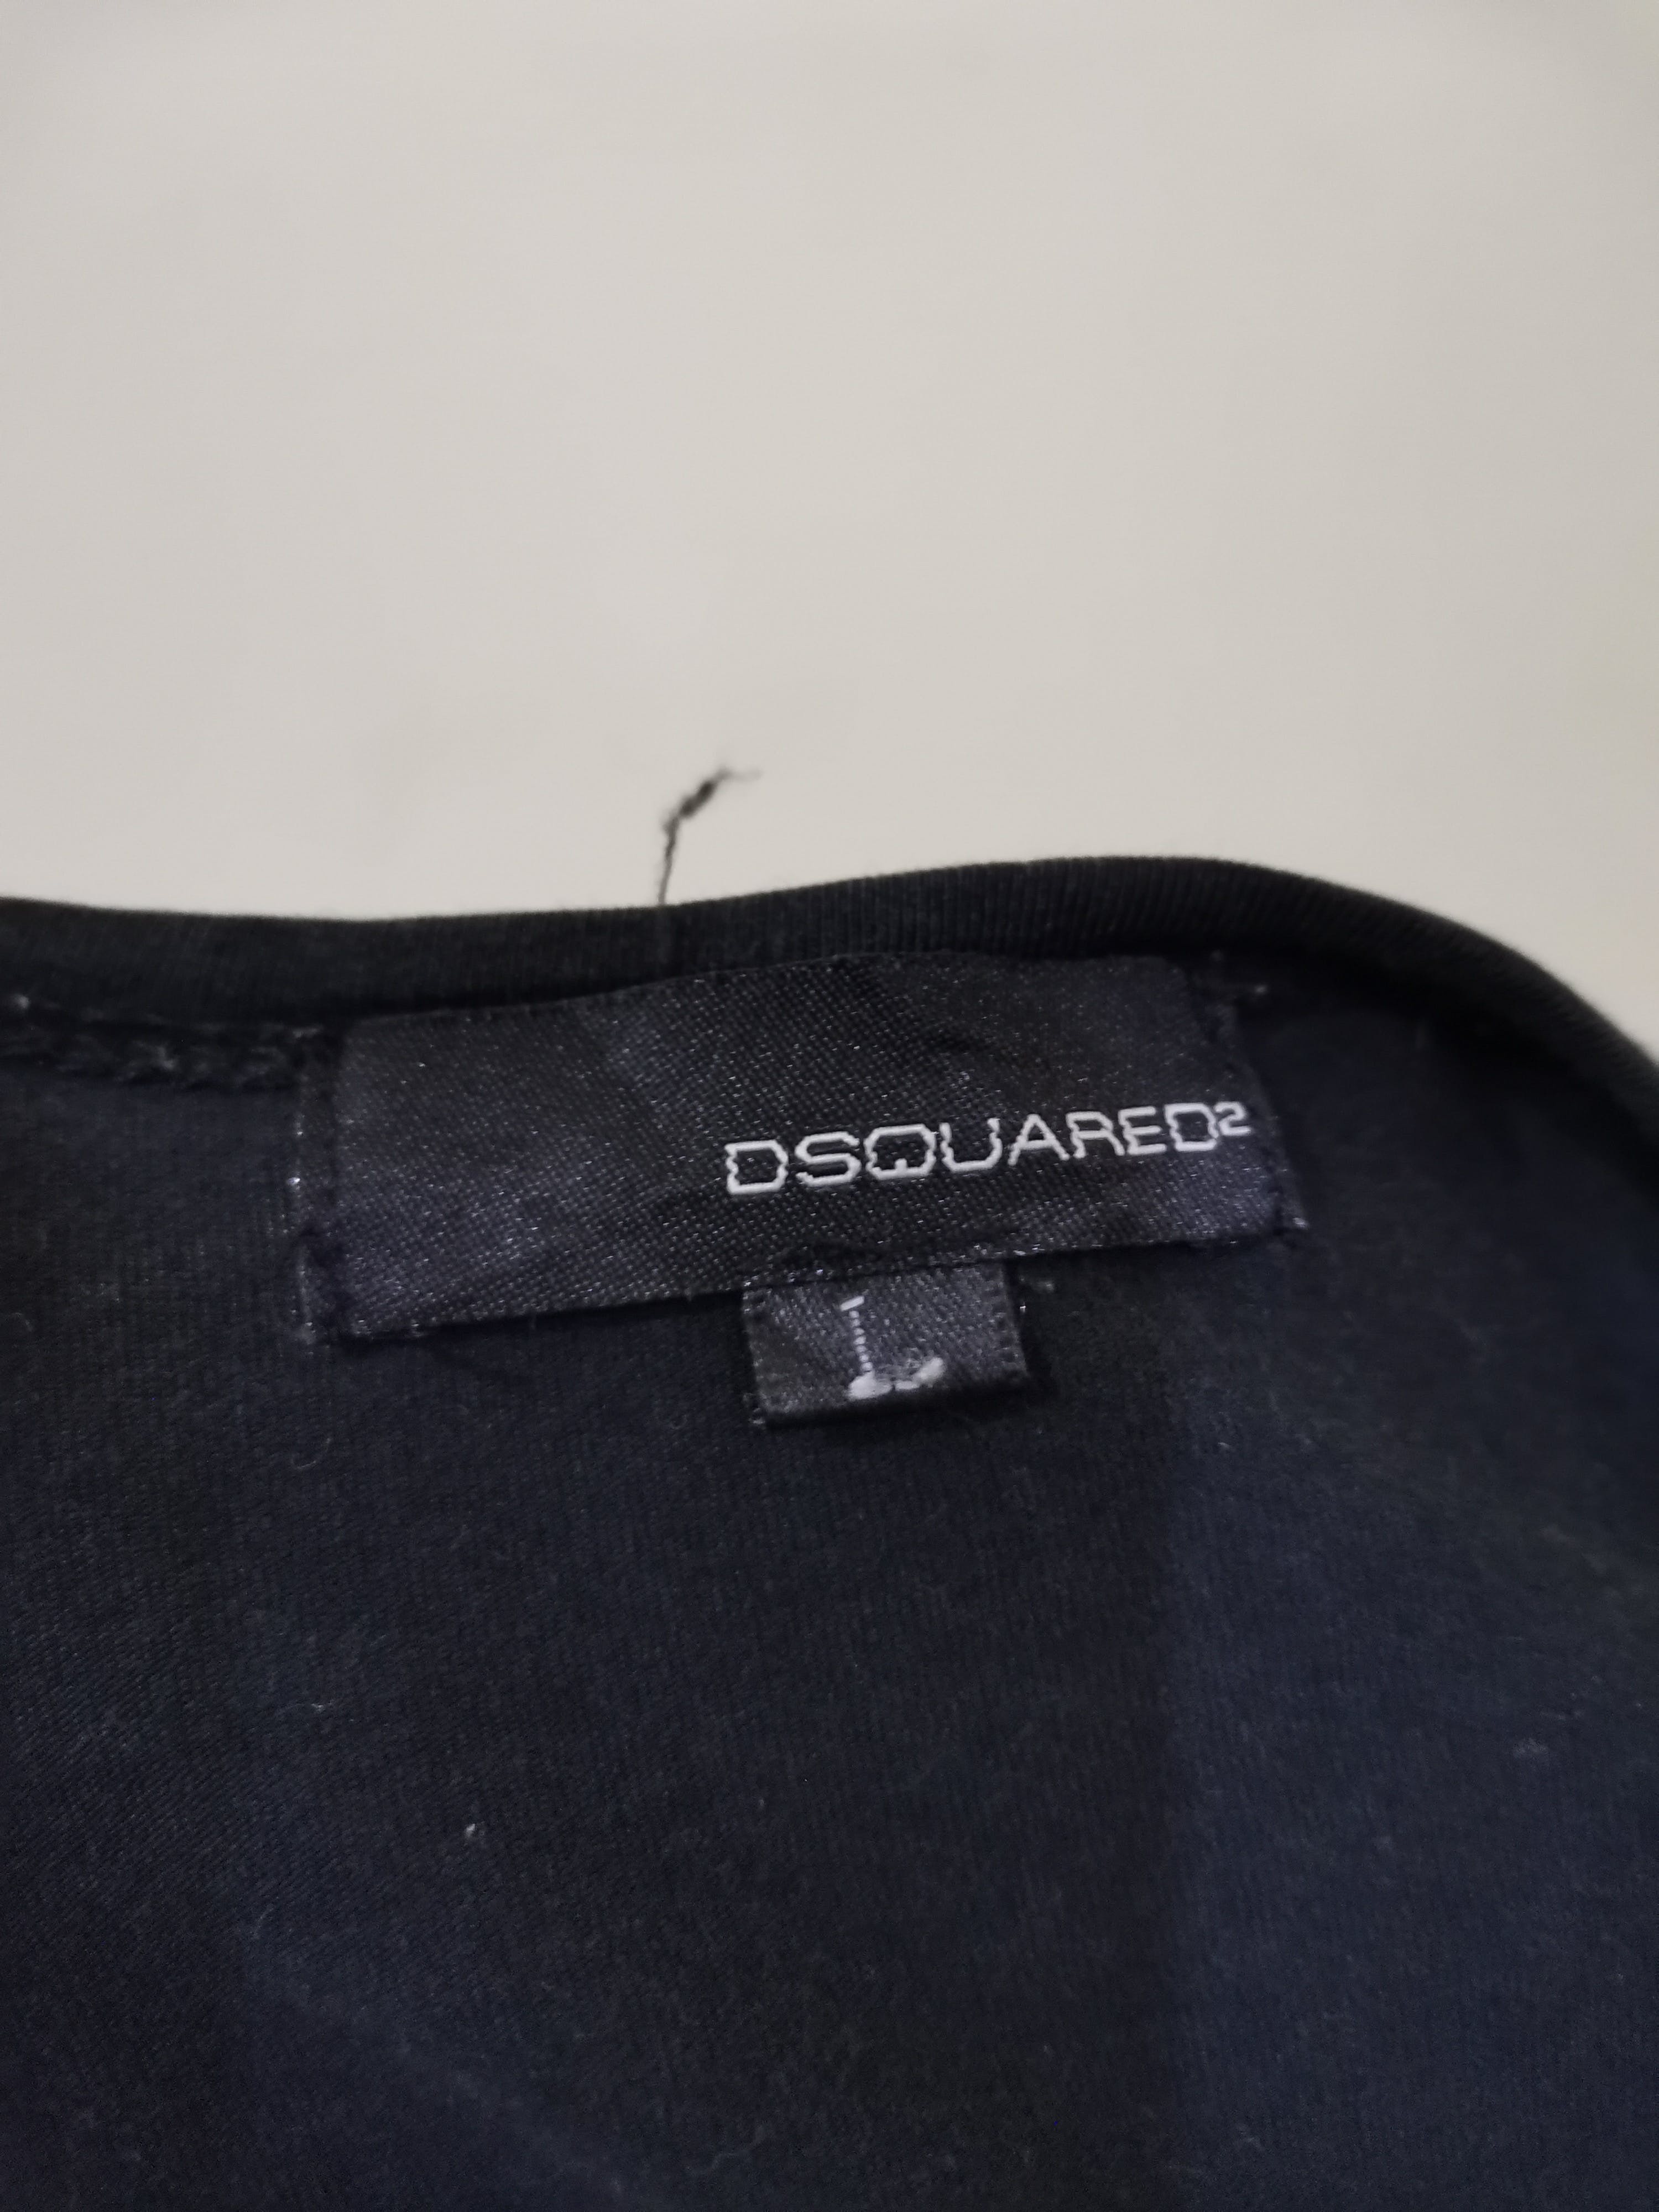 💥DSQUARED2 Black Casual Shirt - Large Size Woman - 4